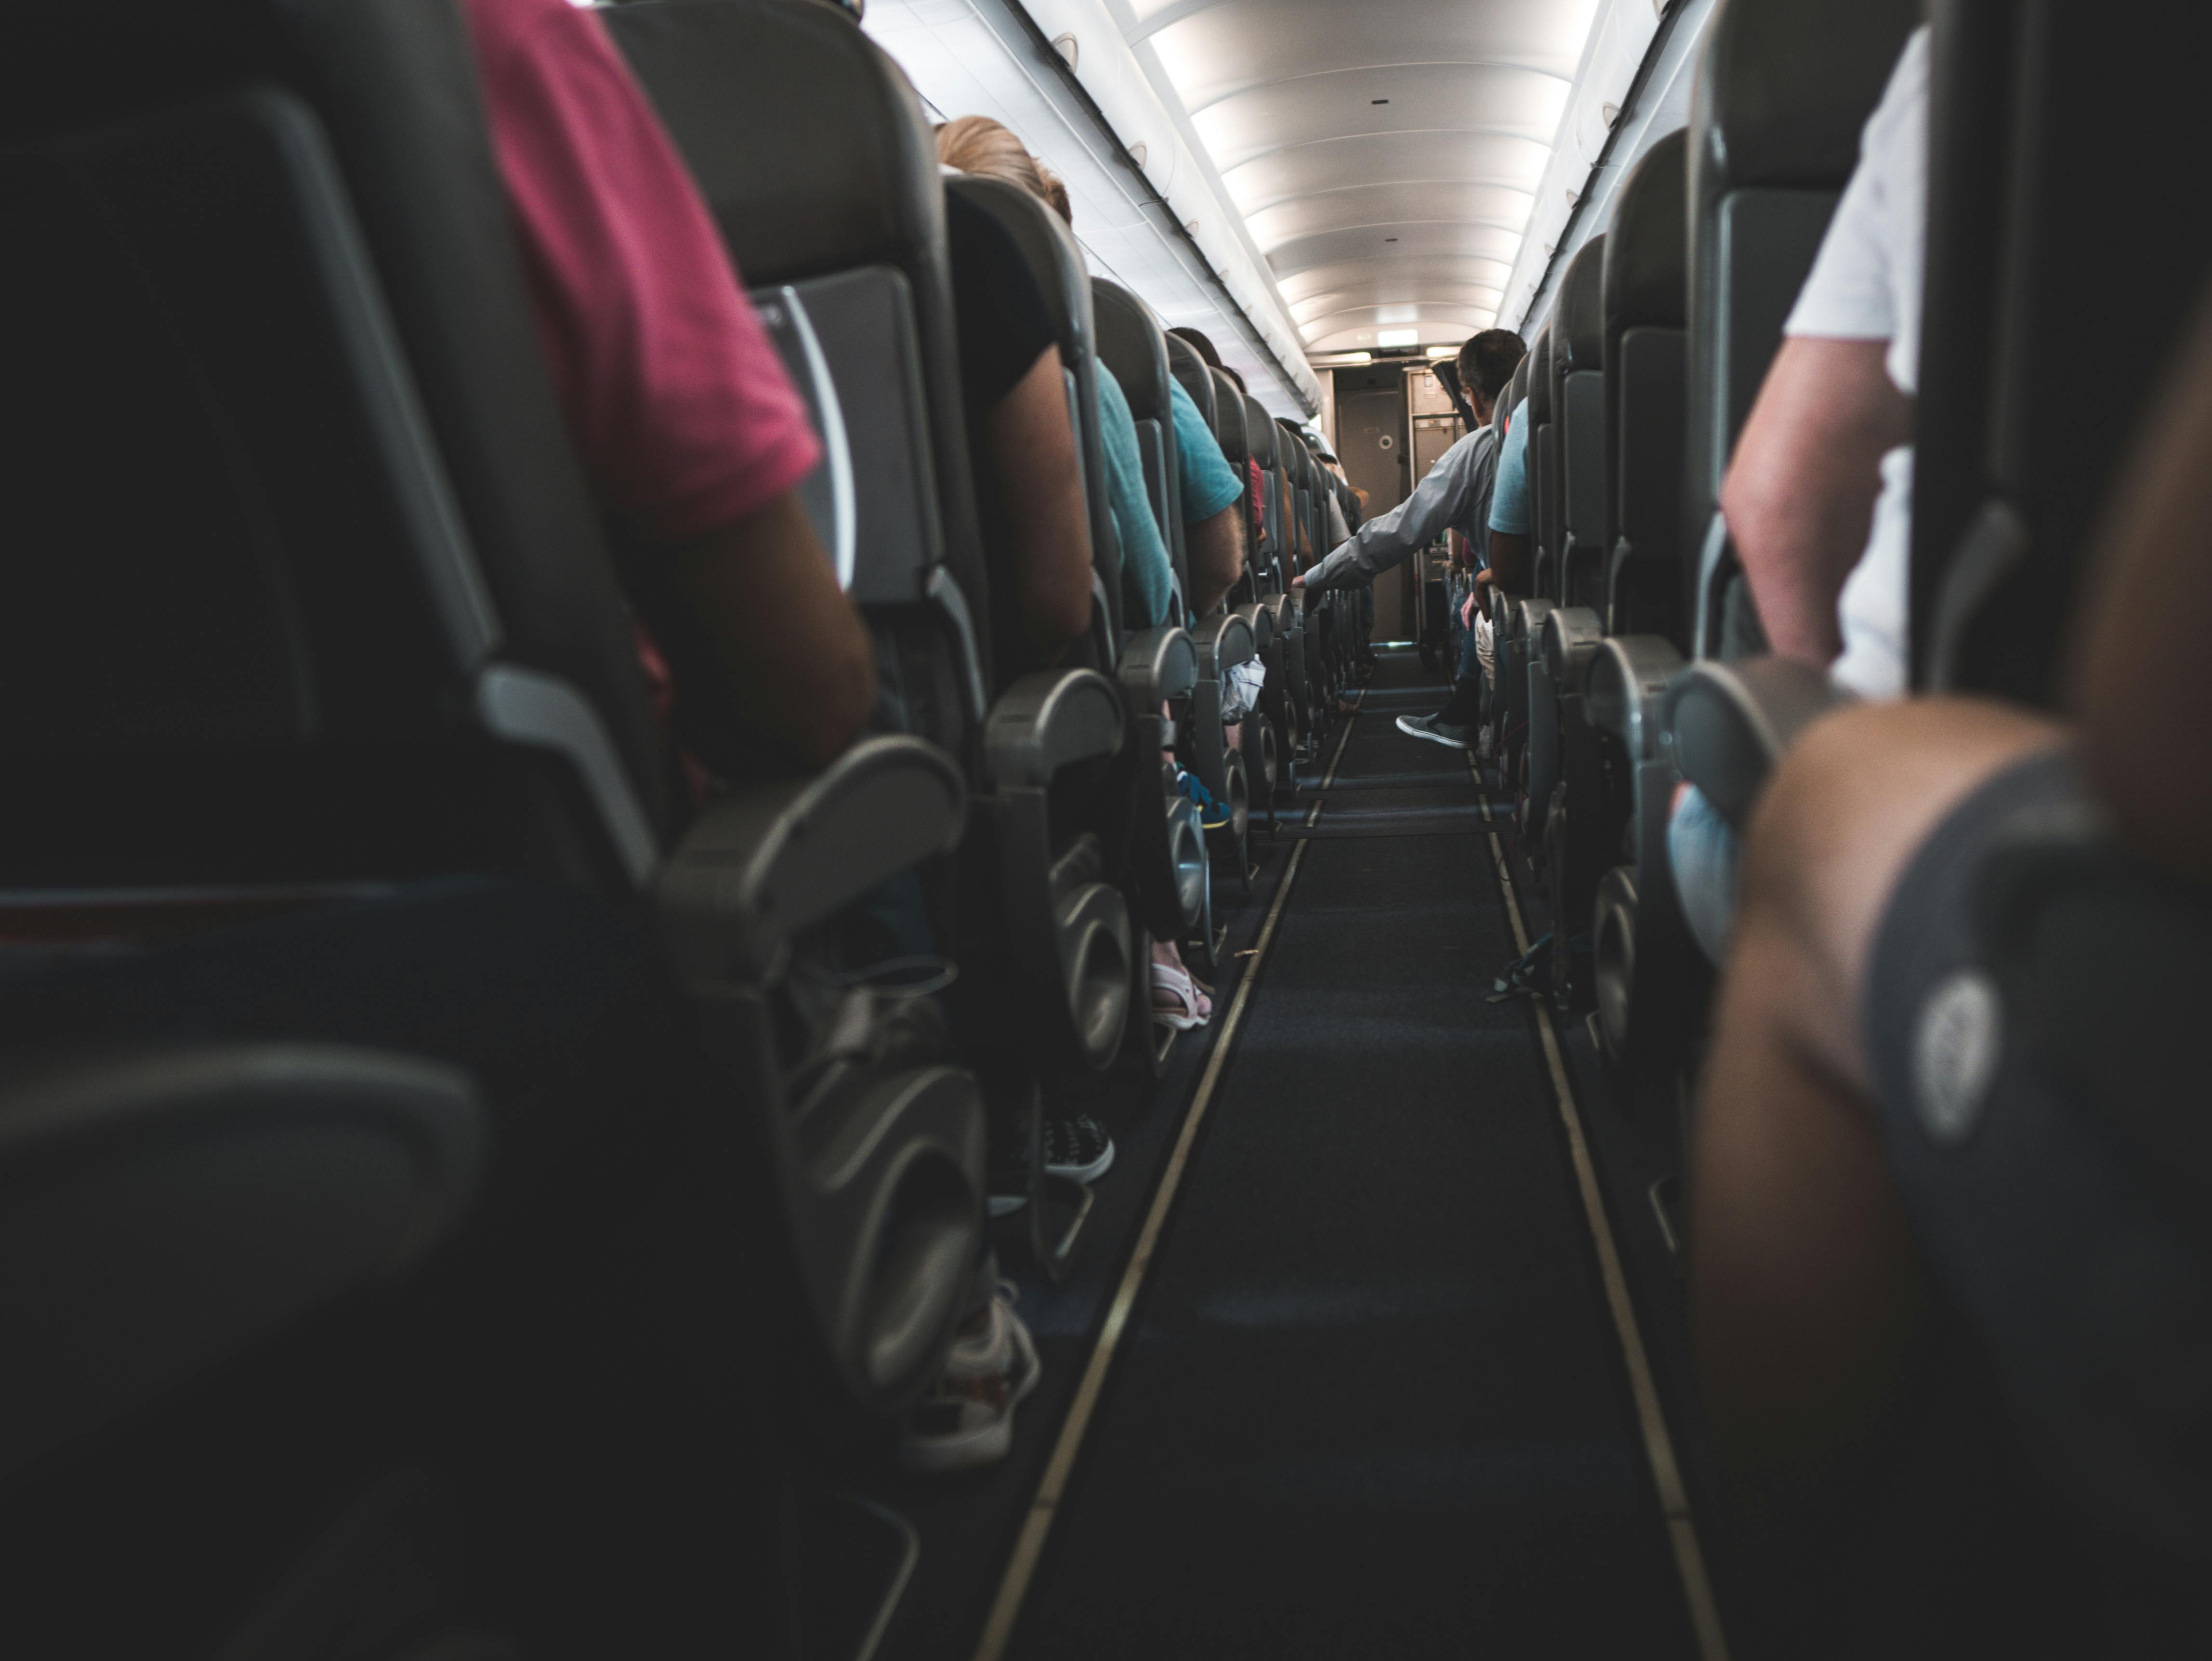 People sitting on plane chairs | Photo: Pexels